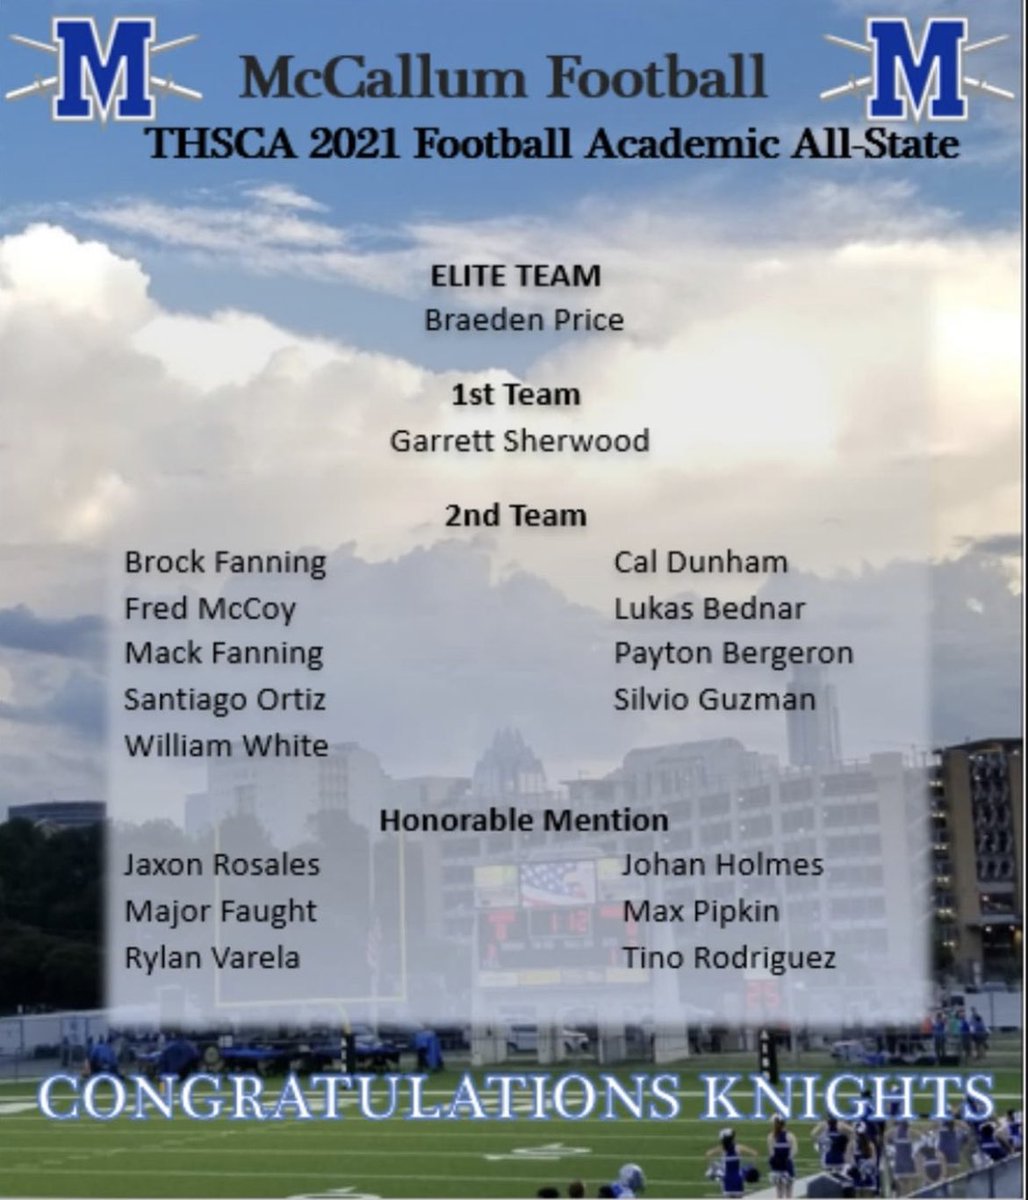 Congratulations to all these hardworking Knights on and off the field!!